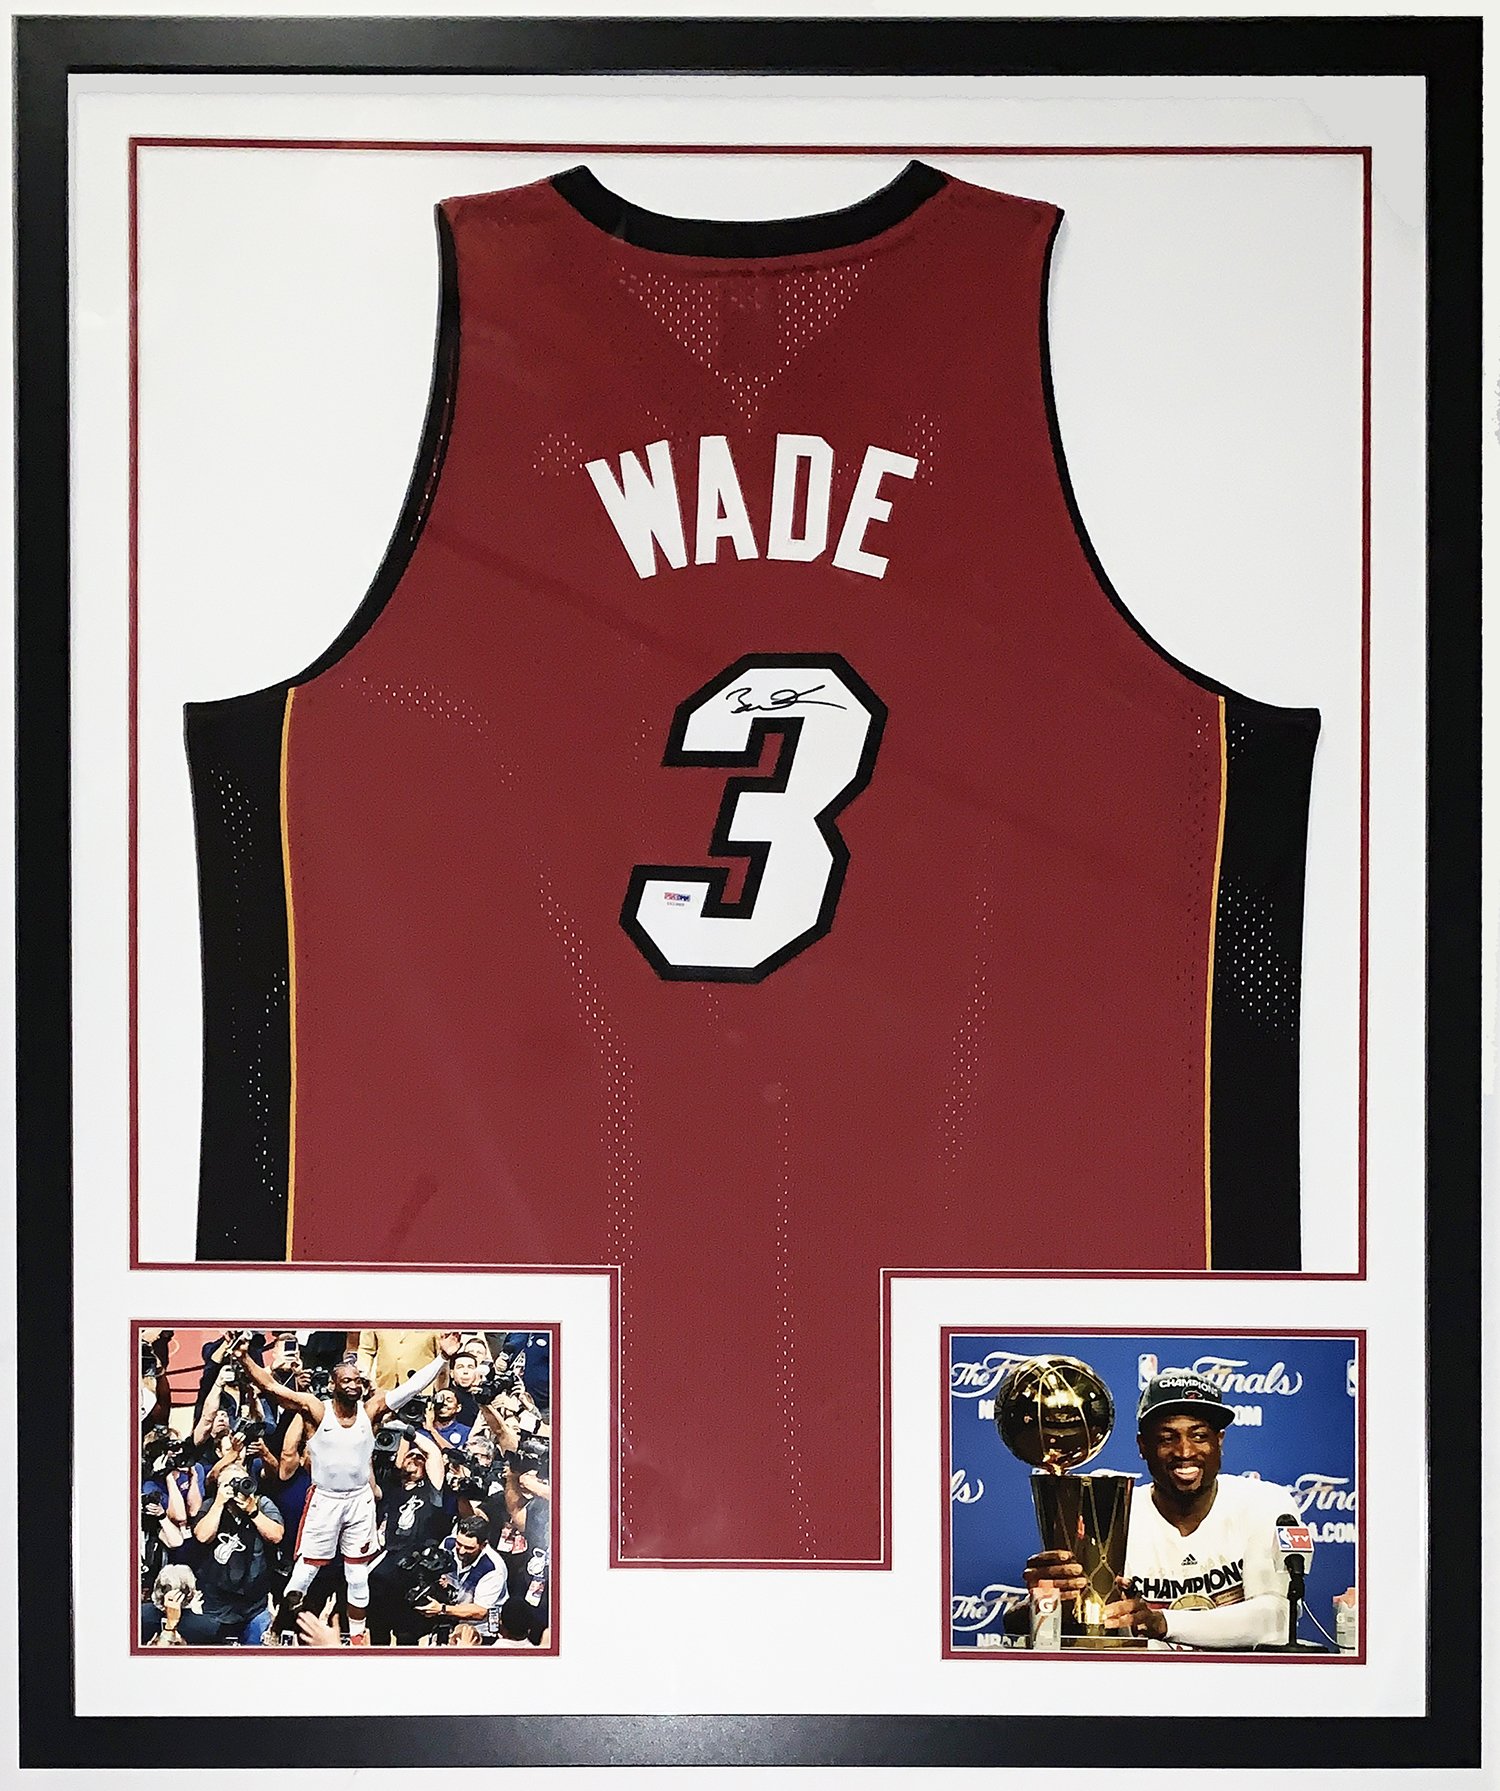 Bleachers Sports Music & Framing — Dwyane Wade Signed Authentic Miami Heat  Jersey - PSA DNA COA Authenticated - Professionally Framed